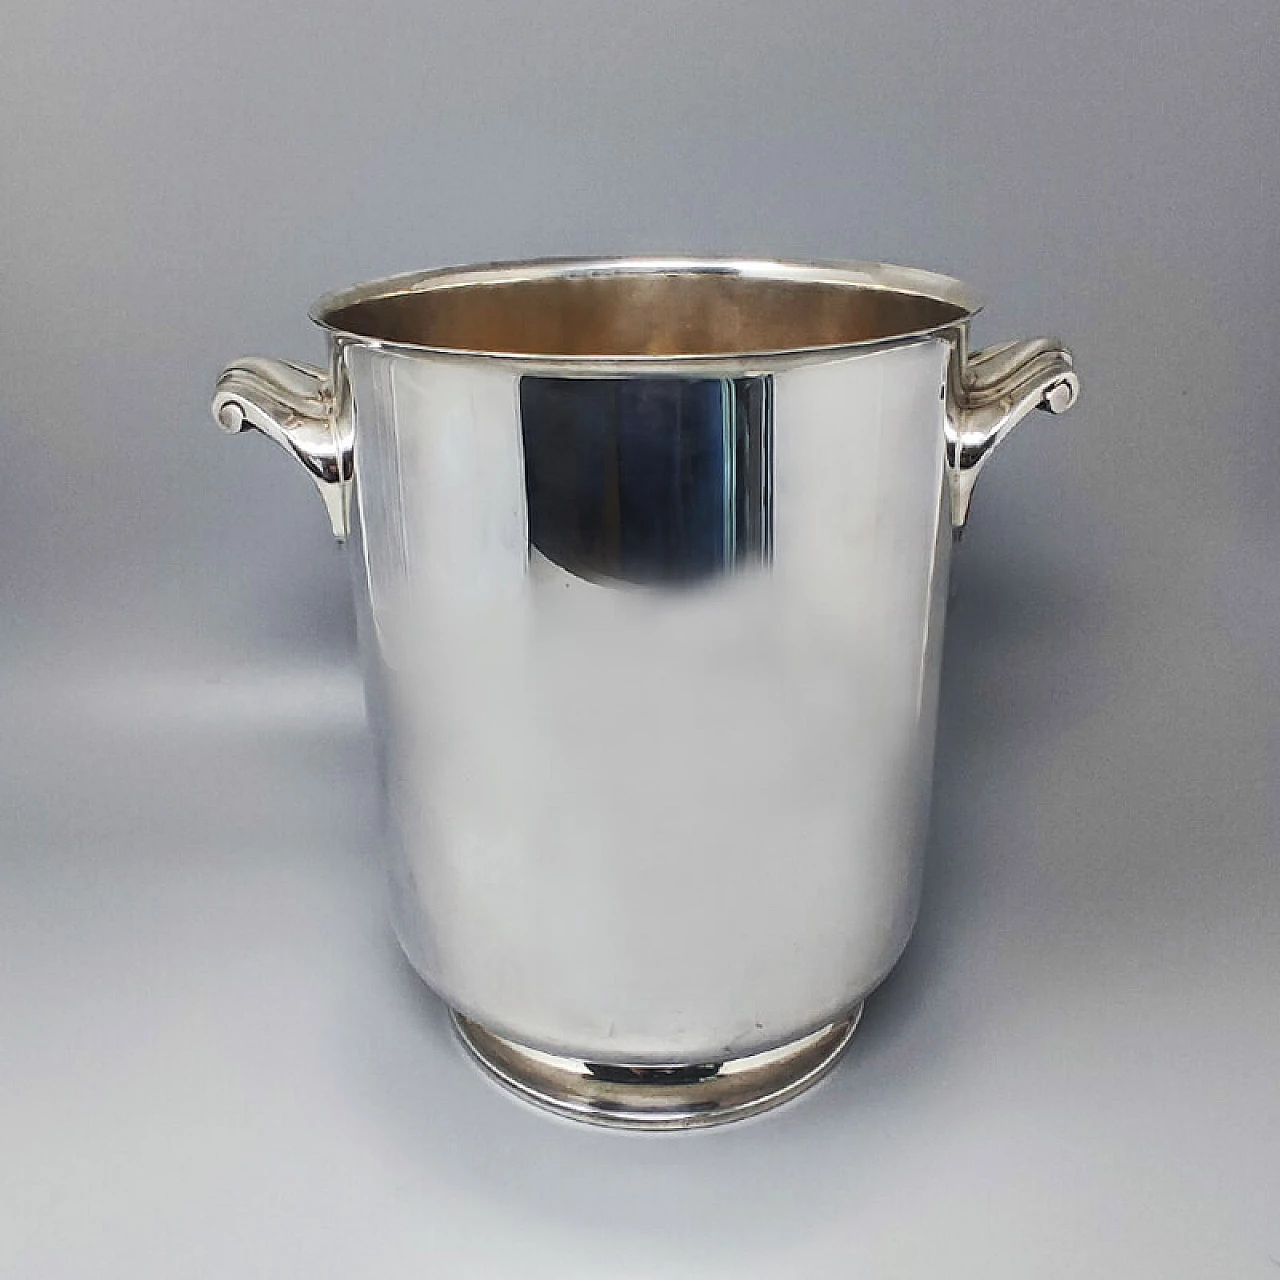 Ormessin silver plated ice bucket by Christofle, 1950s 1